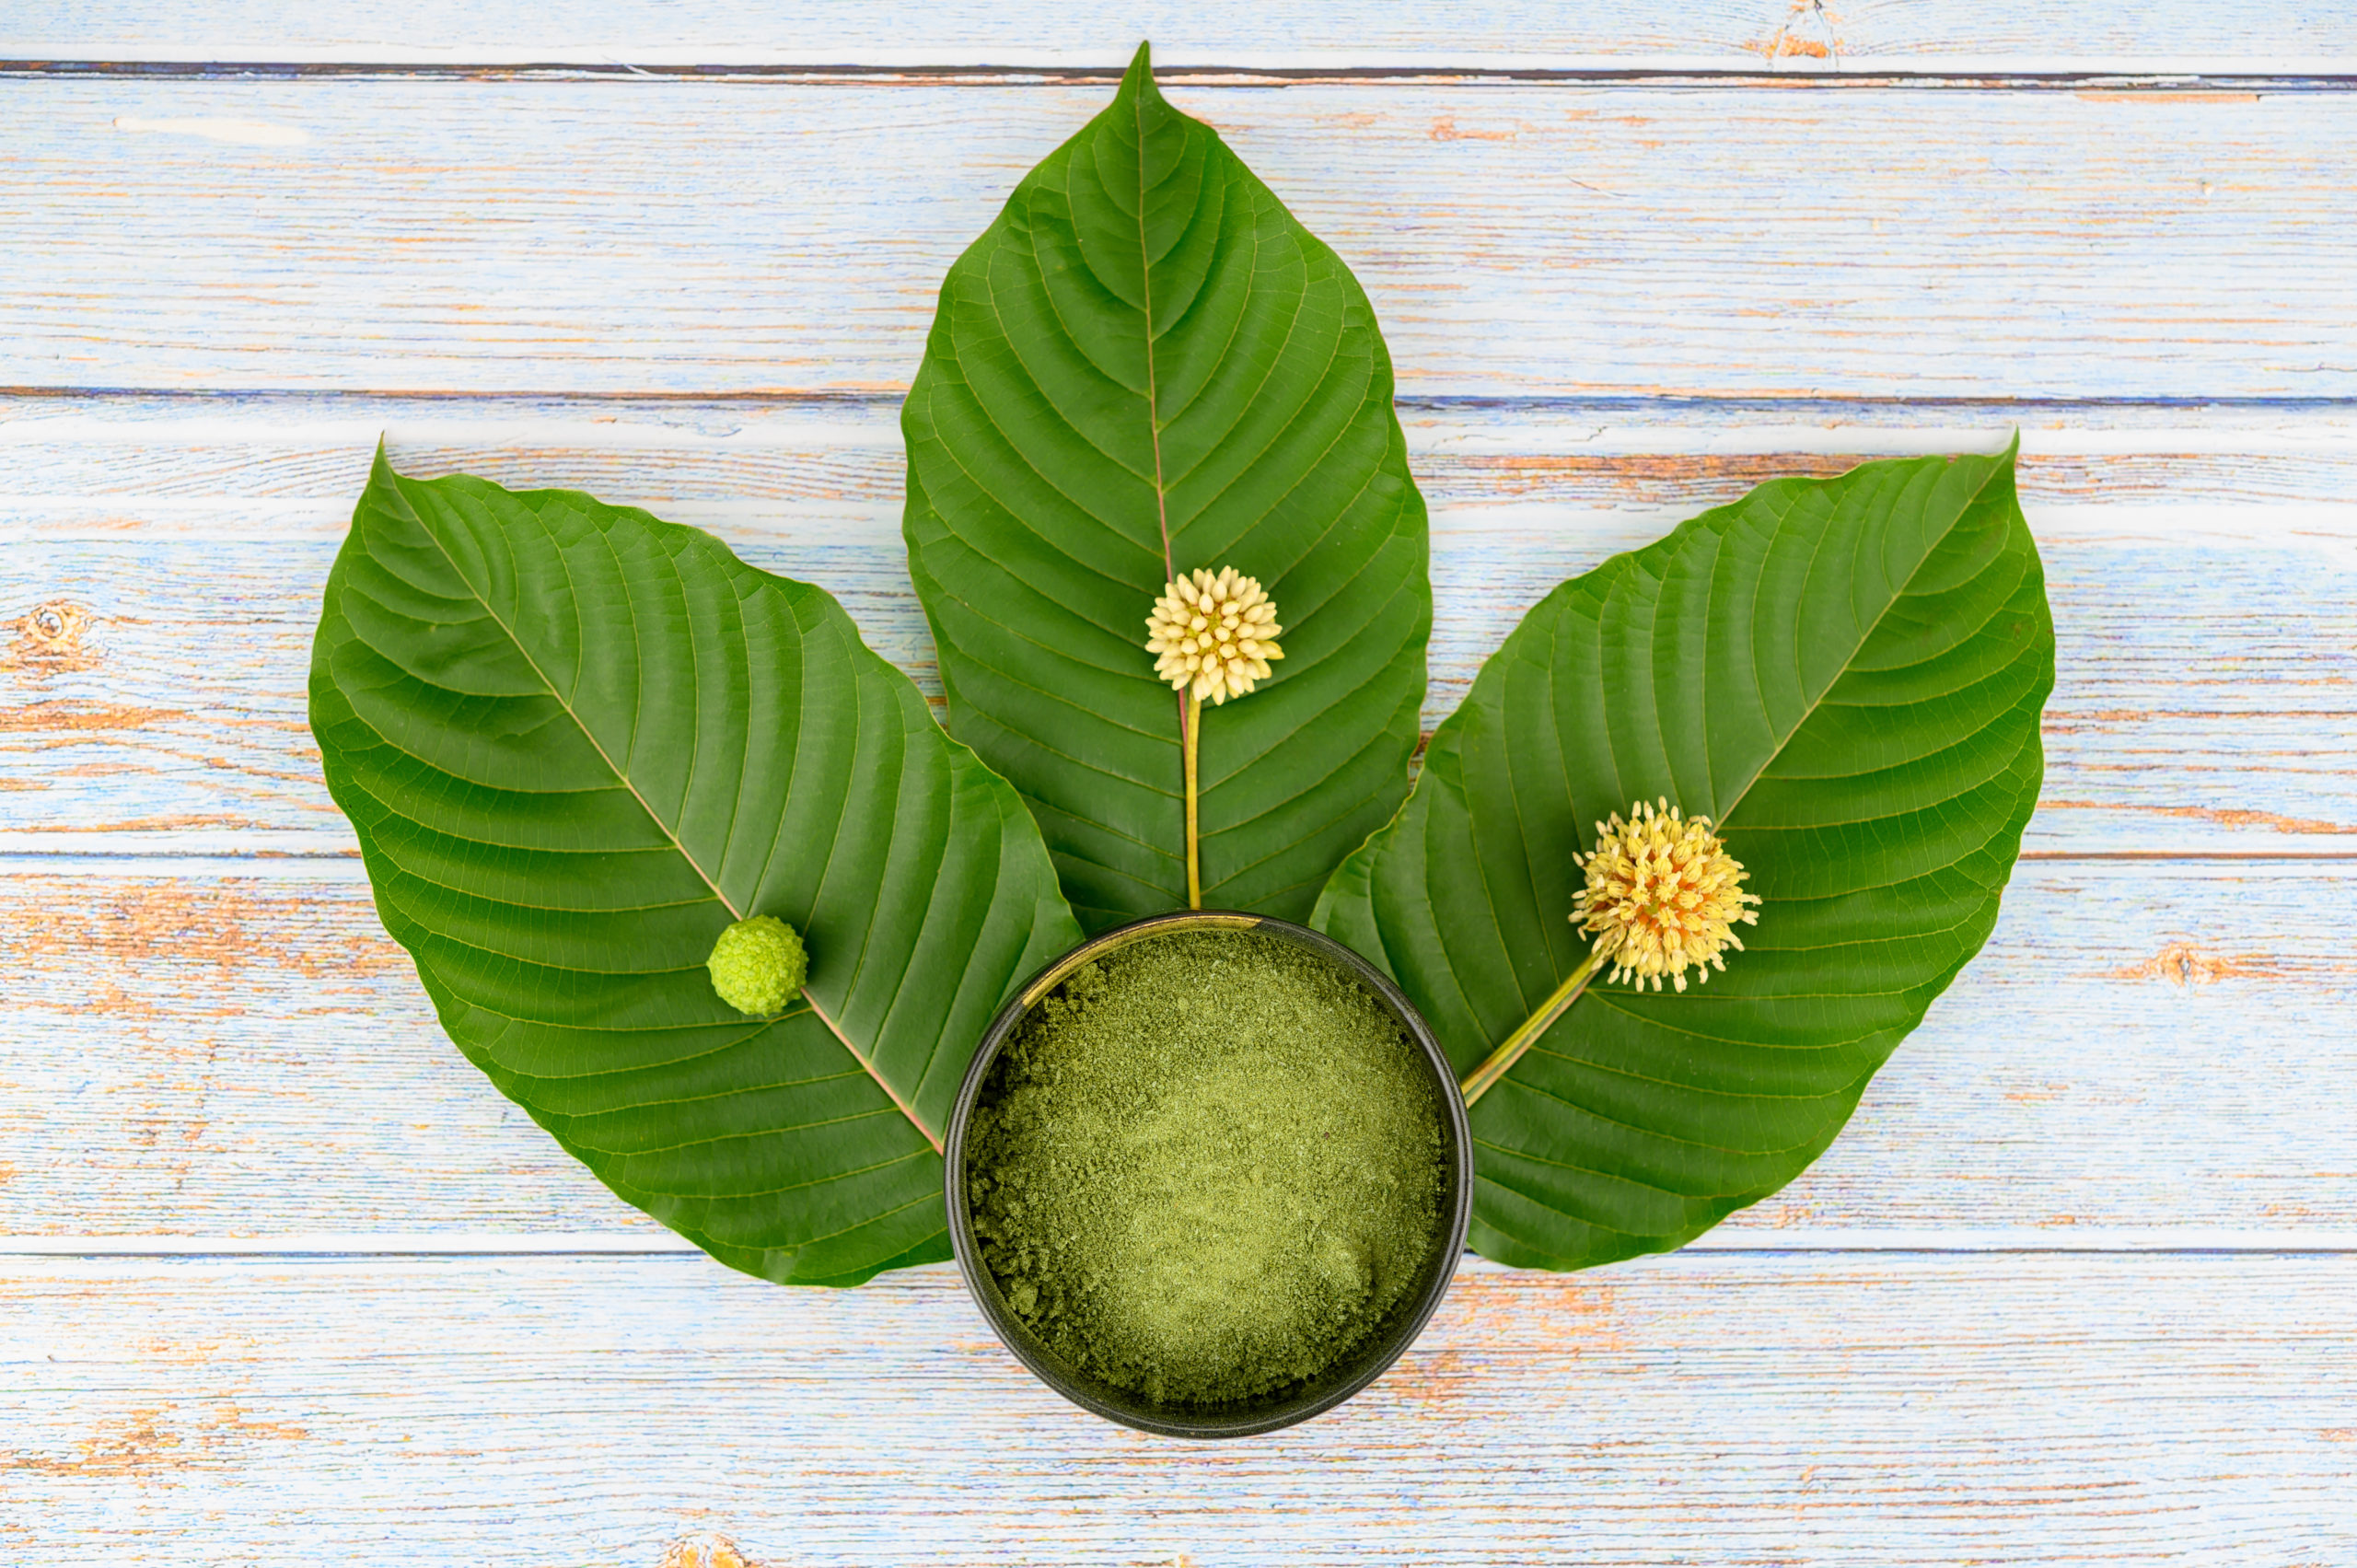 Leaves, flowers, fruits and liquid of Kratom or mitragynine on wooden background. The leaves eaten as a drug It is a medicinal plant and is addictive.